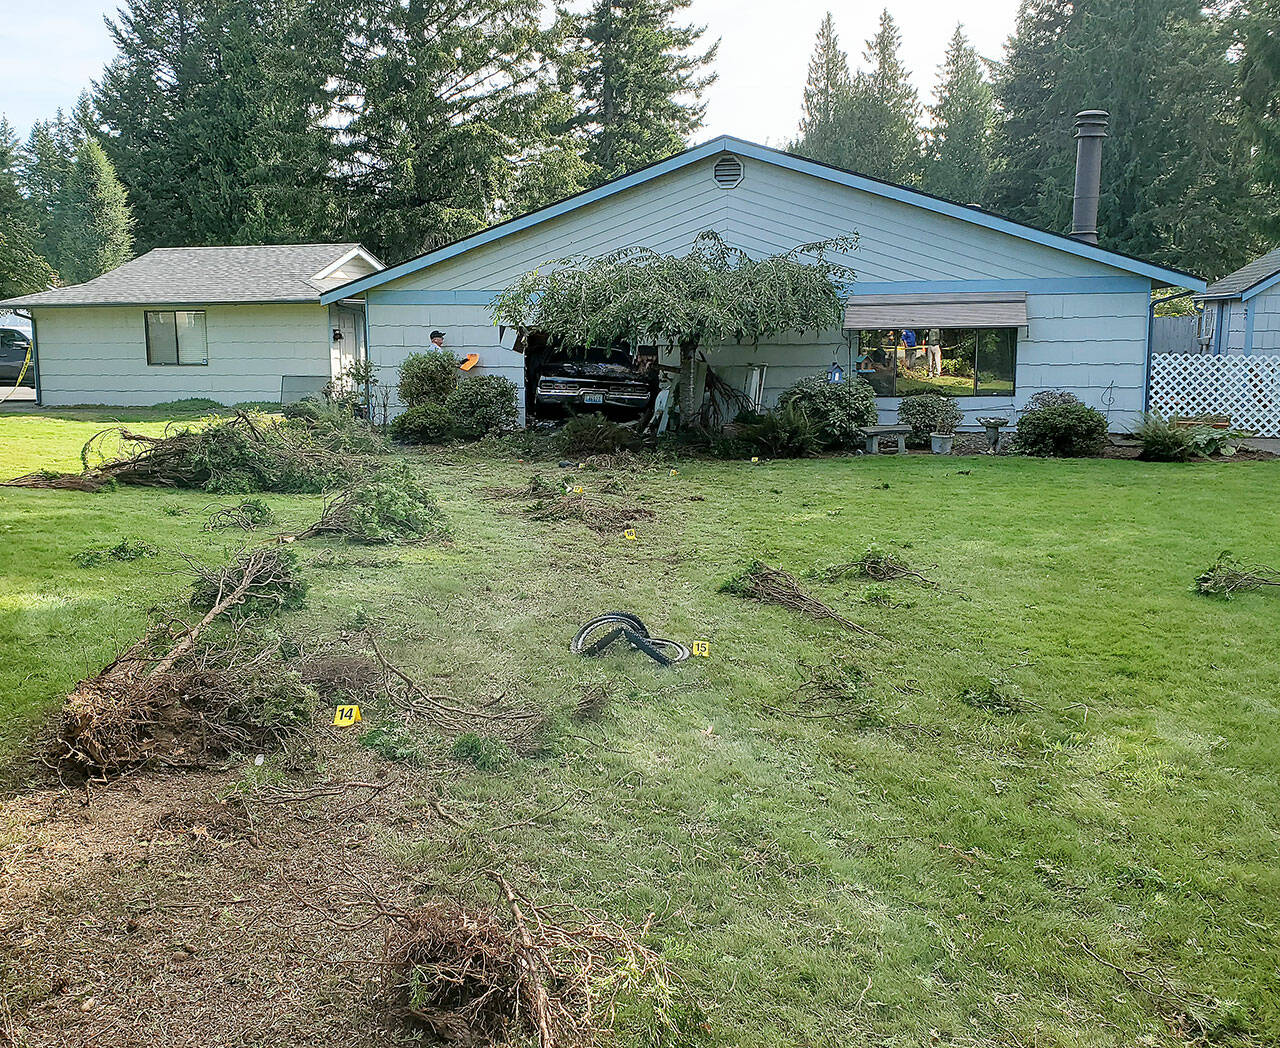 An alleged drunken driver, being pursued by police, hit a bicyclist and crashed into a Marysville home, killing a 97-year-old woman in late August of 2020, prior to a law going into effect that now limits when police can pursue motorists. (Marysville Police Department / Herald file)